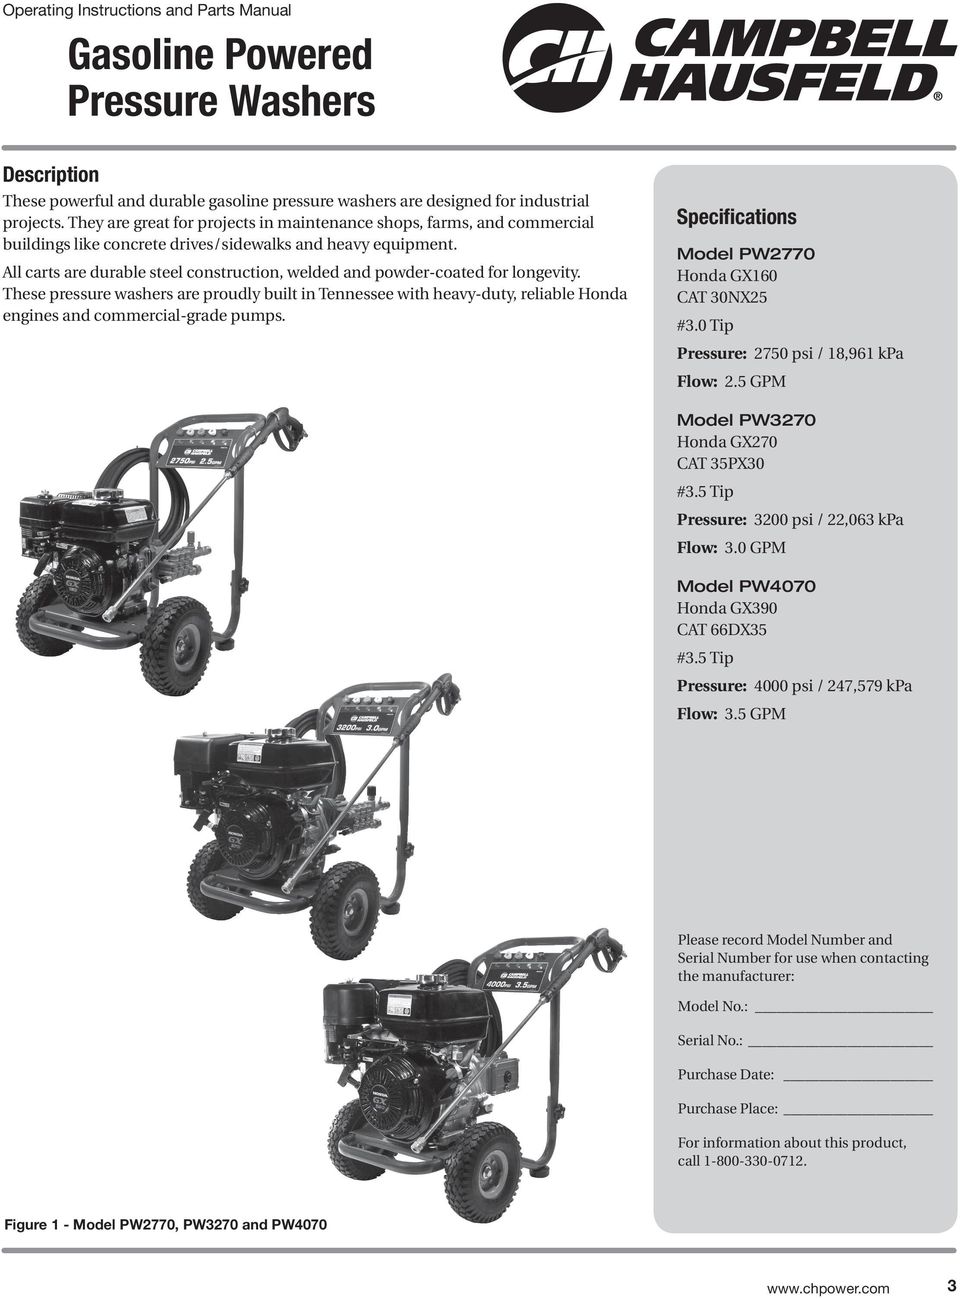 All carts are durable steel construction, welded and powder-coated for longevity.